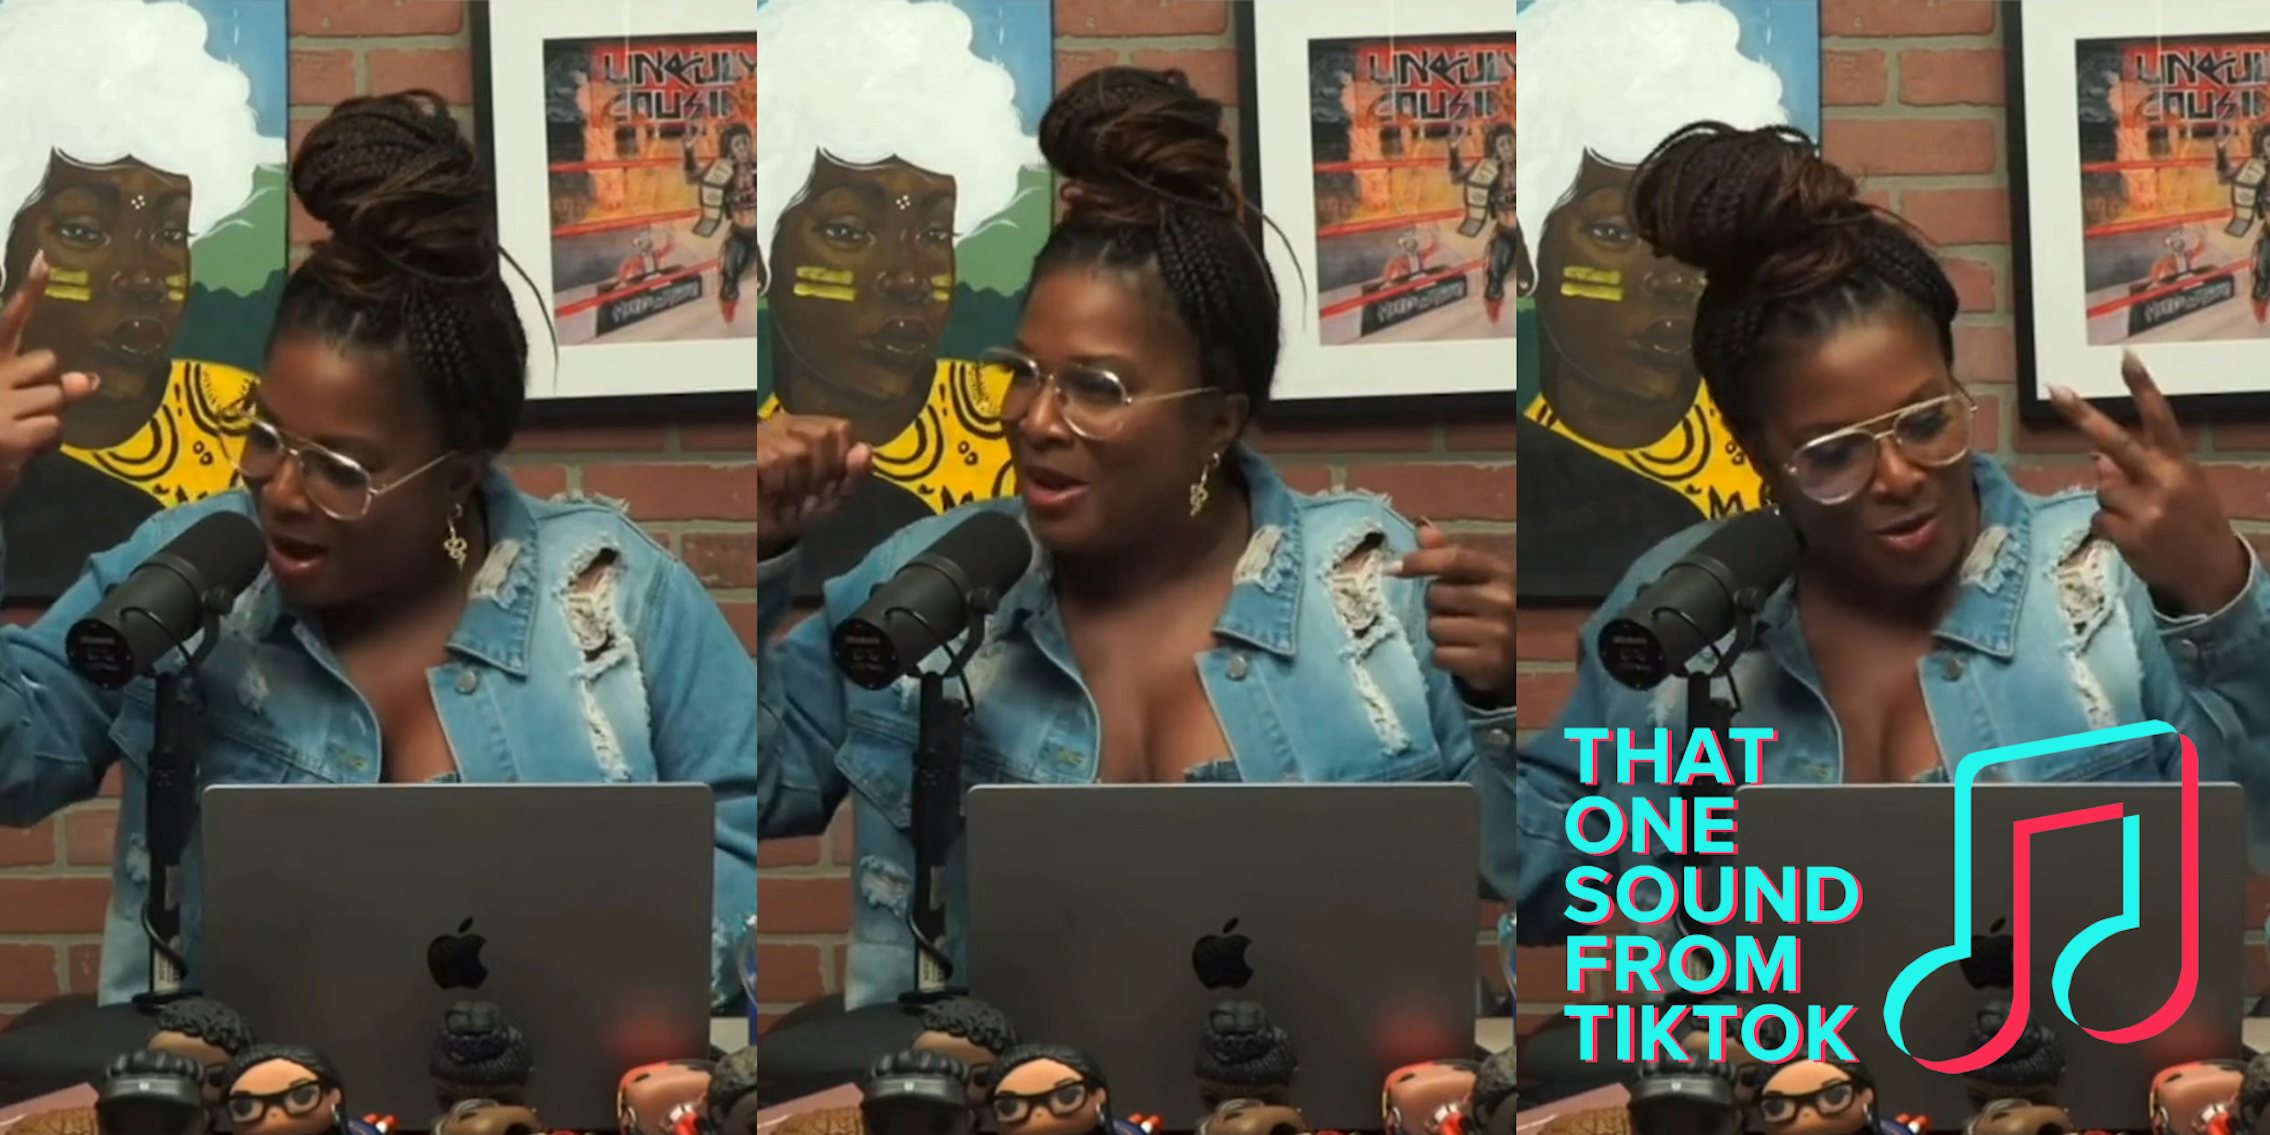 @thatchickangeltv rapping into microphone at laptop (l) @thatchickangeltv rapping into microphone at laptop (c) @thatchickangeltv rapping into microphone at laptop with THAT ONE SOUND FROM TIKTOK logo in bottom right corner (r)